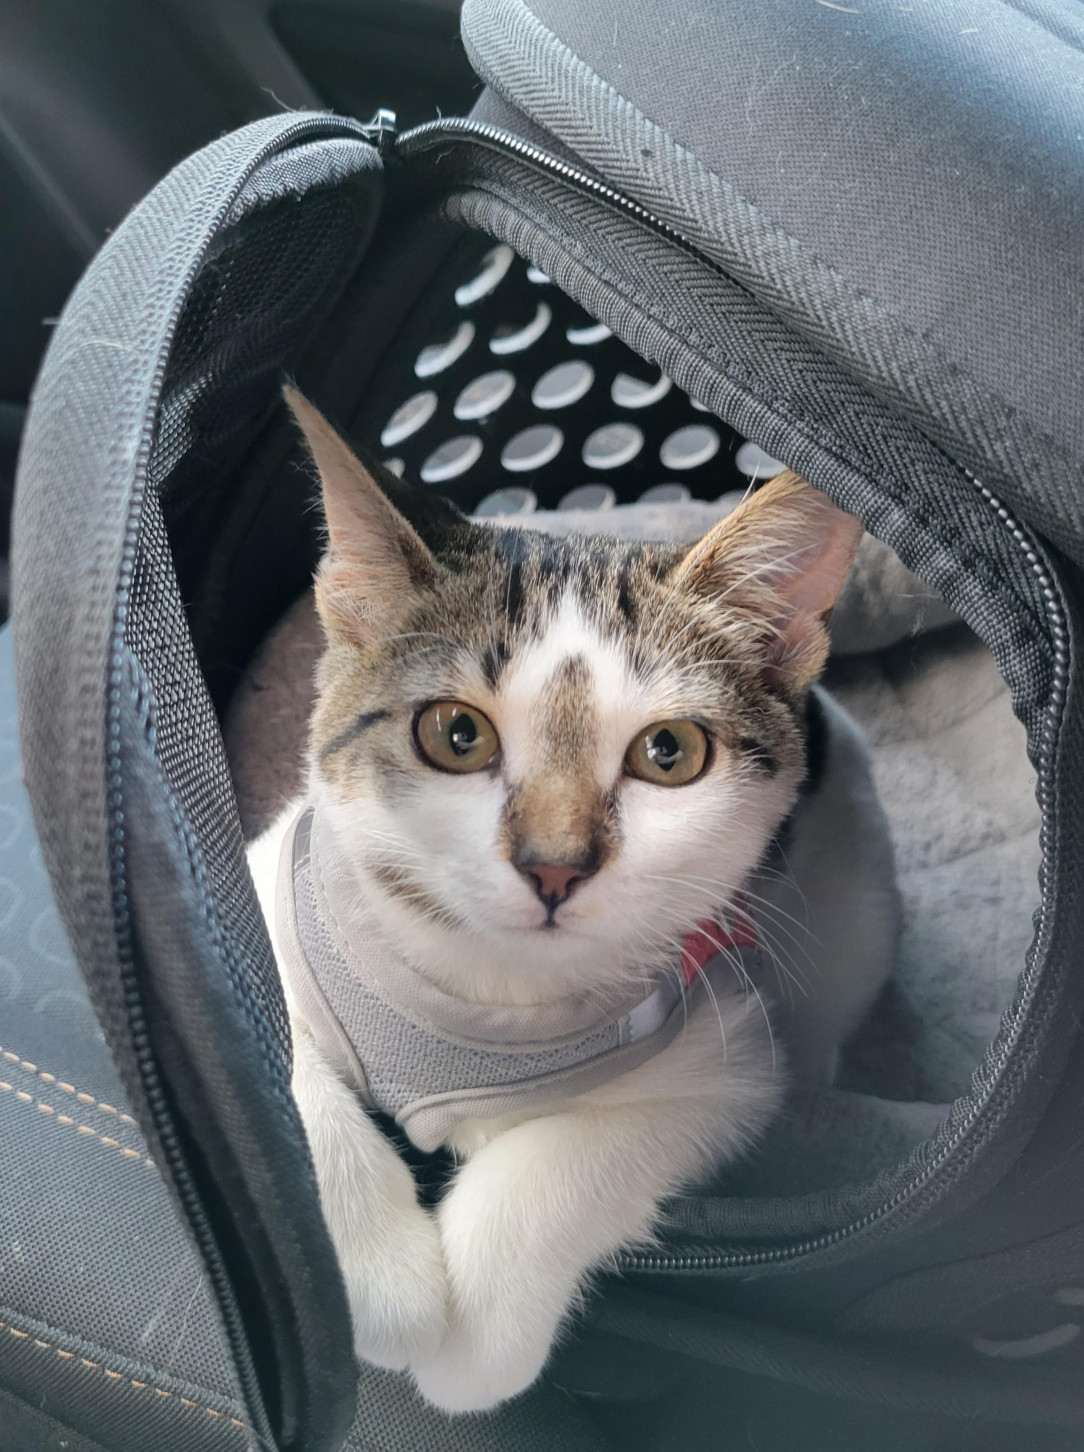 Took Arrow on a car ride today. I stopped for a bit and opened the door to her carrier and she sat there so polite and pretty!